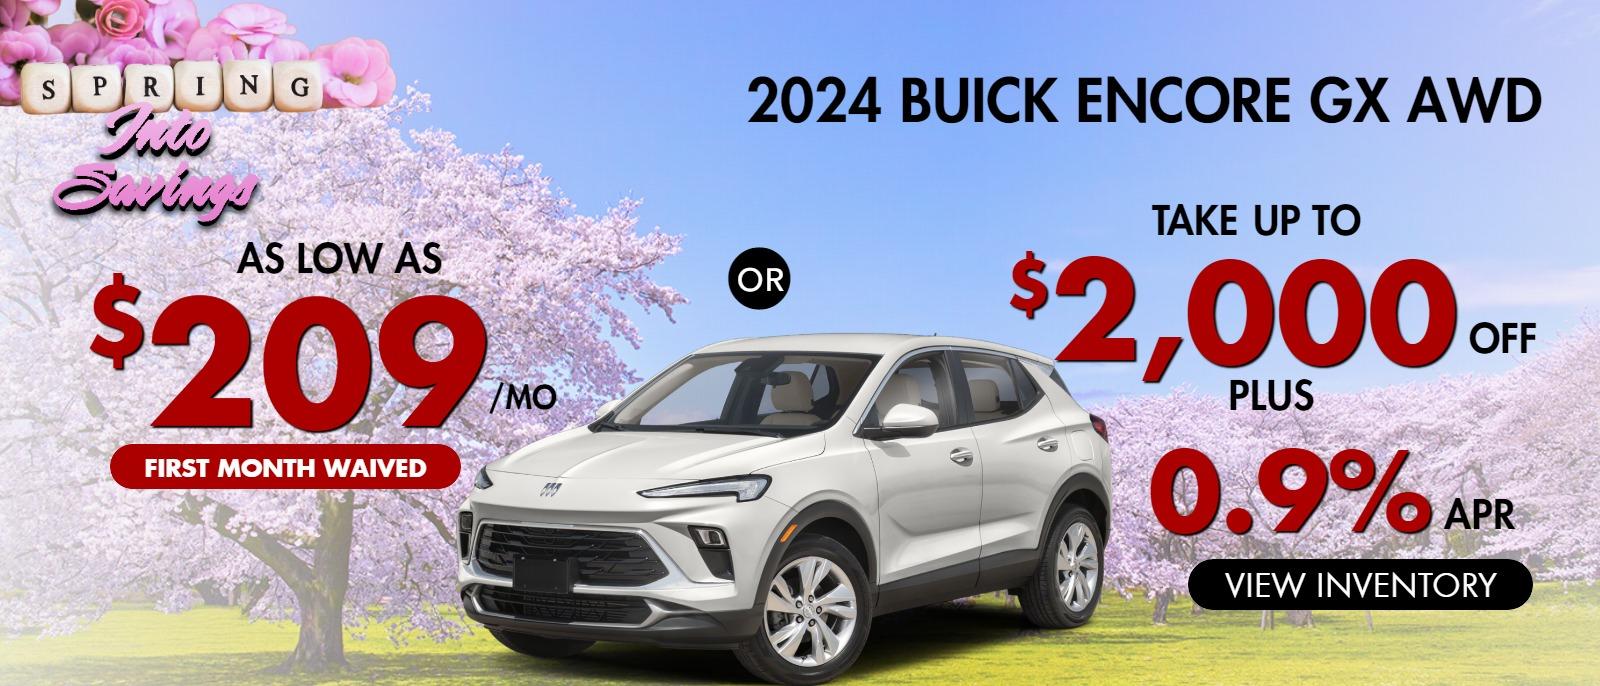 2024 Encore GX AWD 
Stock B3806


take up to $2000 OFF & 0.9% finance

Or
AS LOW AS 
$209/mo (first month waived)